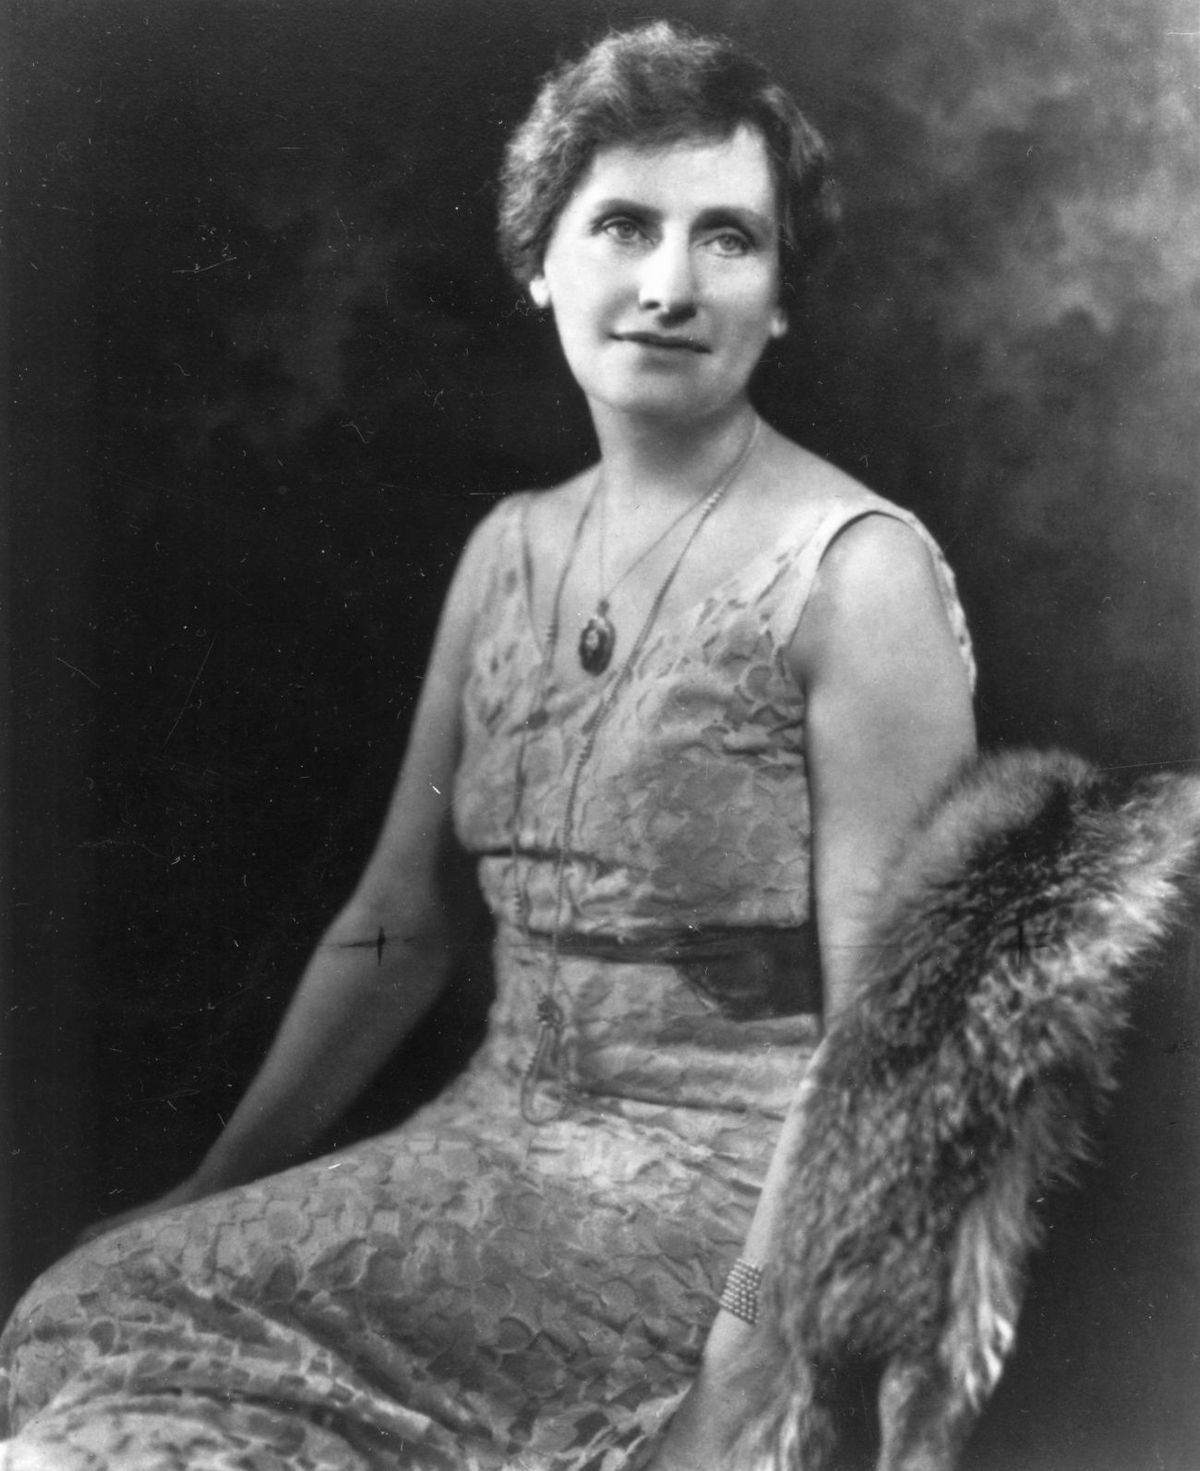 1925 First woman governor of a state in the US